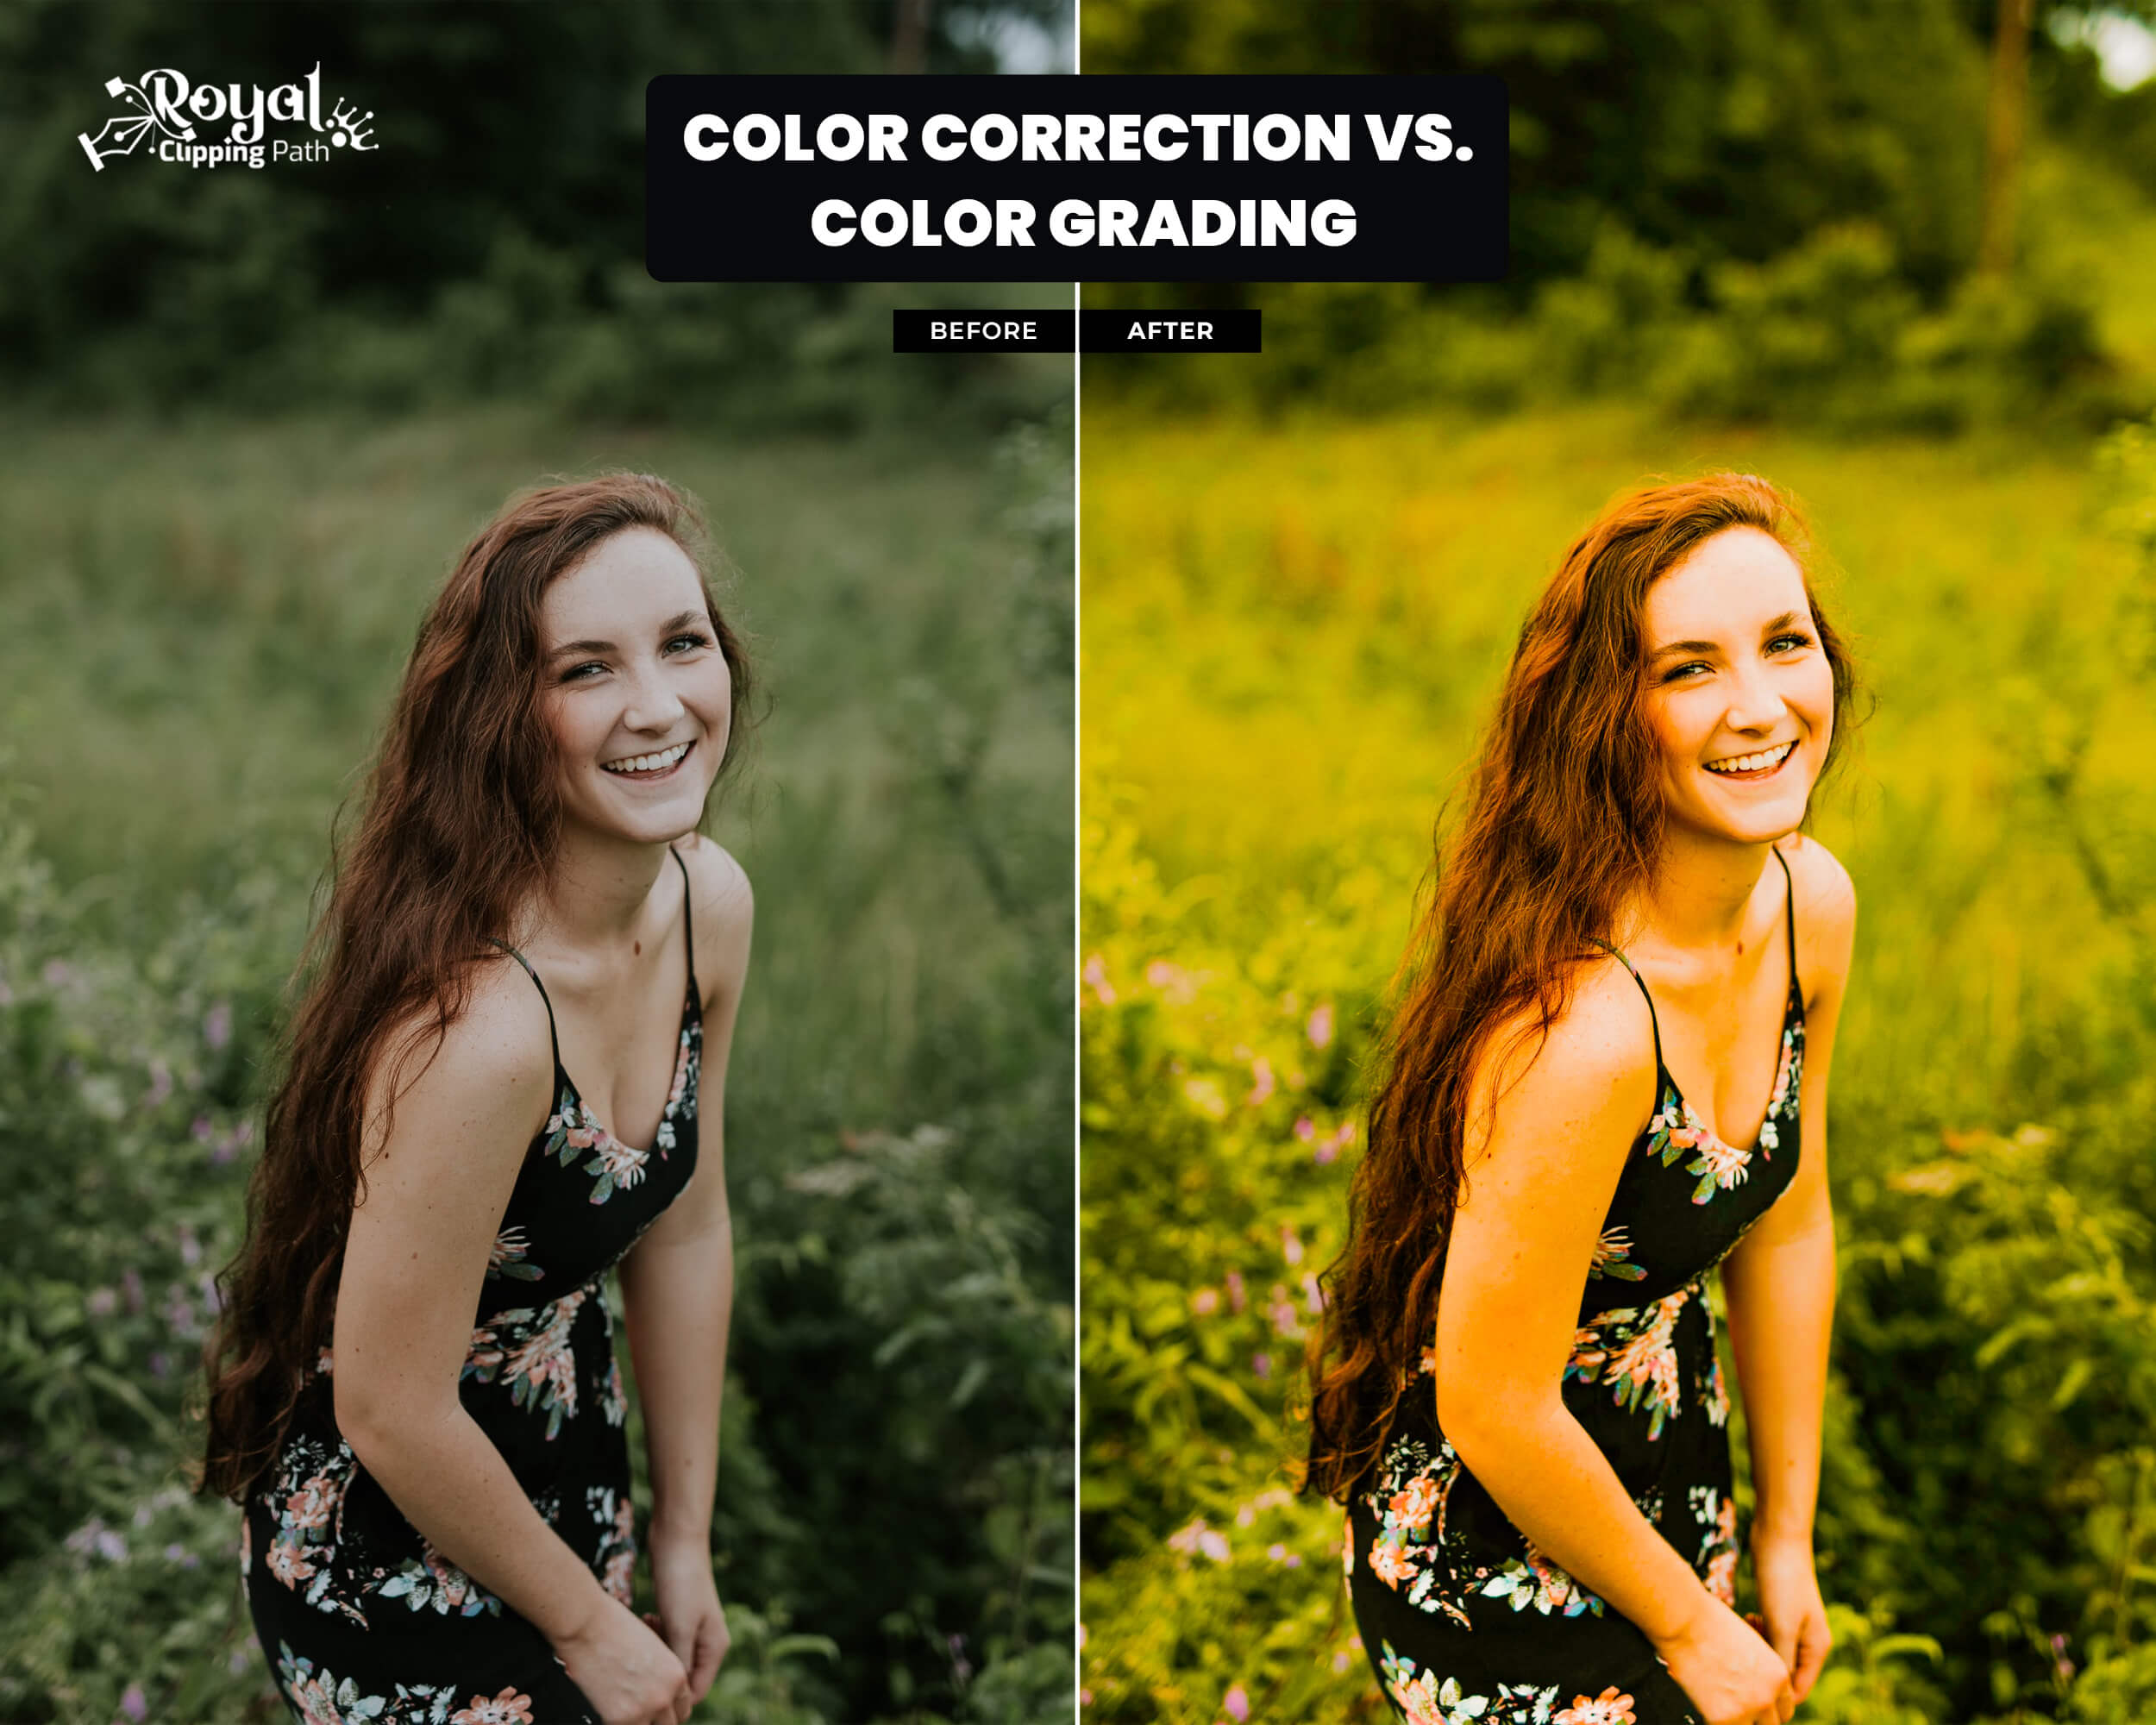 A Comprehensive Guide to Color Correction vs. Color Grading in Photo Editing